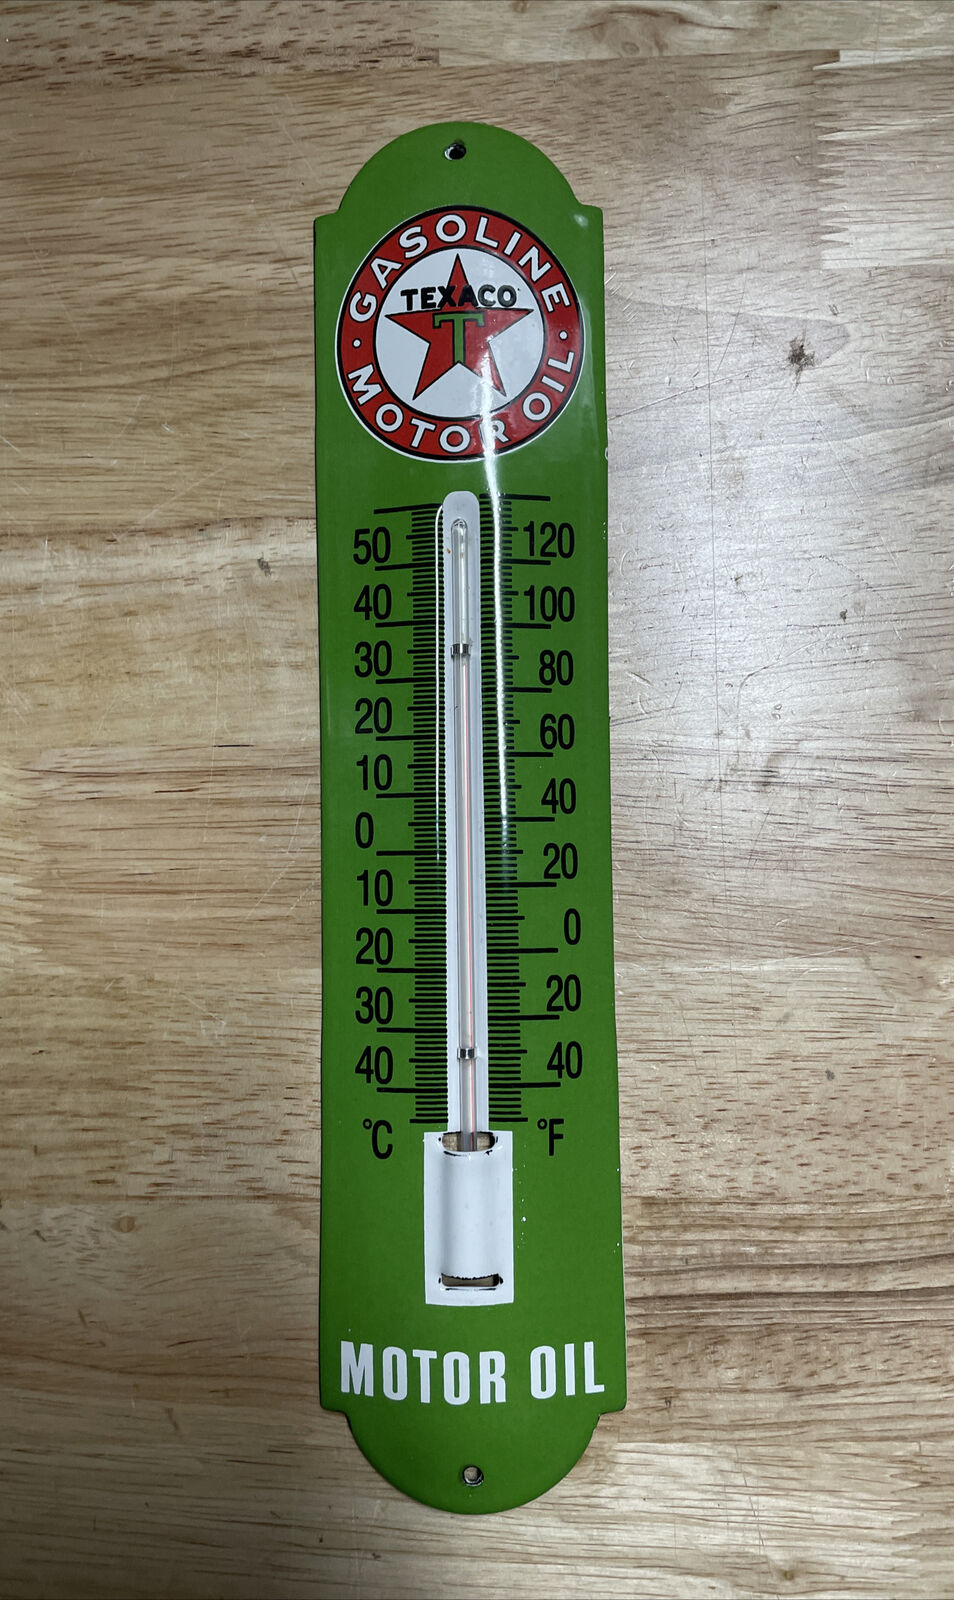 VINTAGE TEXACO MOTOR OIL PORCELAIN SIGN GAS SERVICE STATION THERMOMETER OIL #M